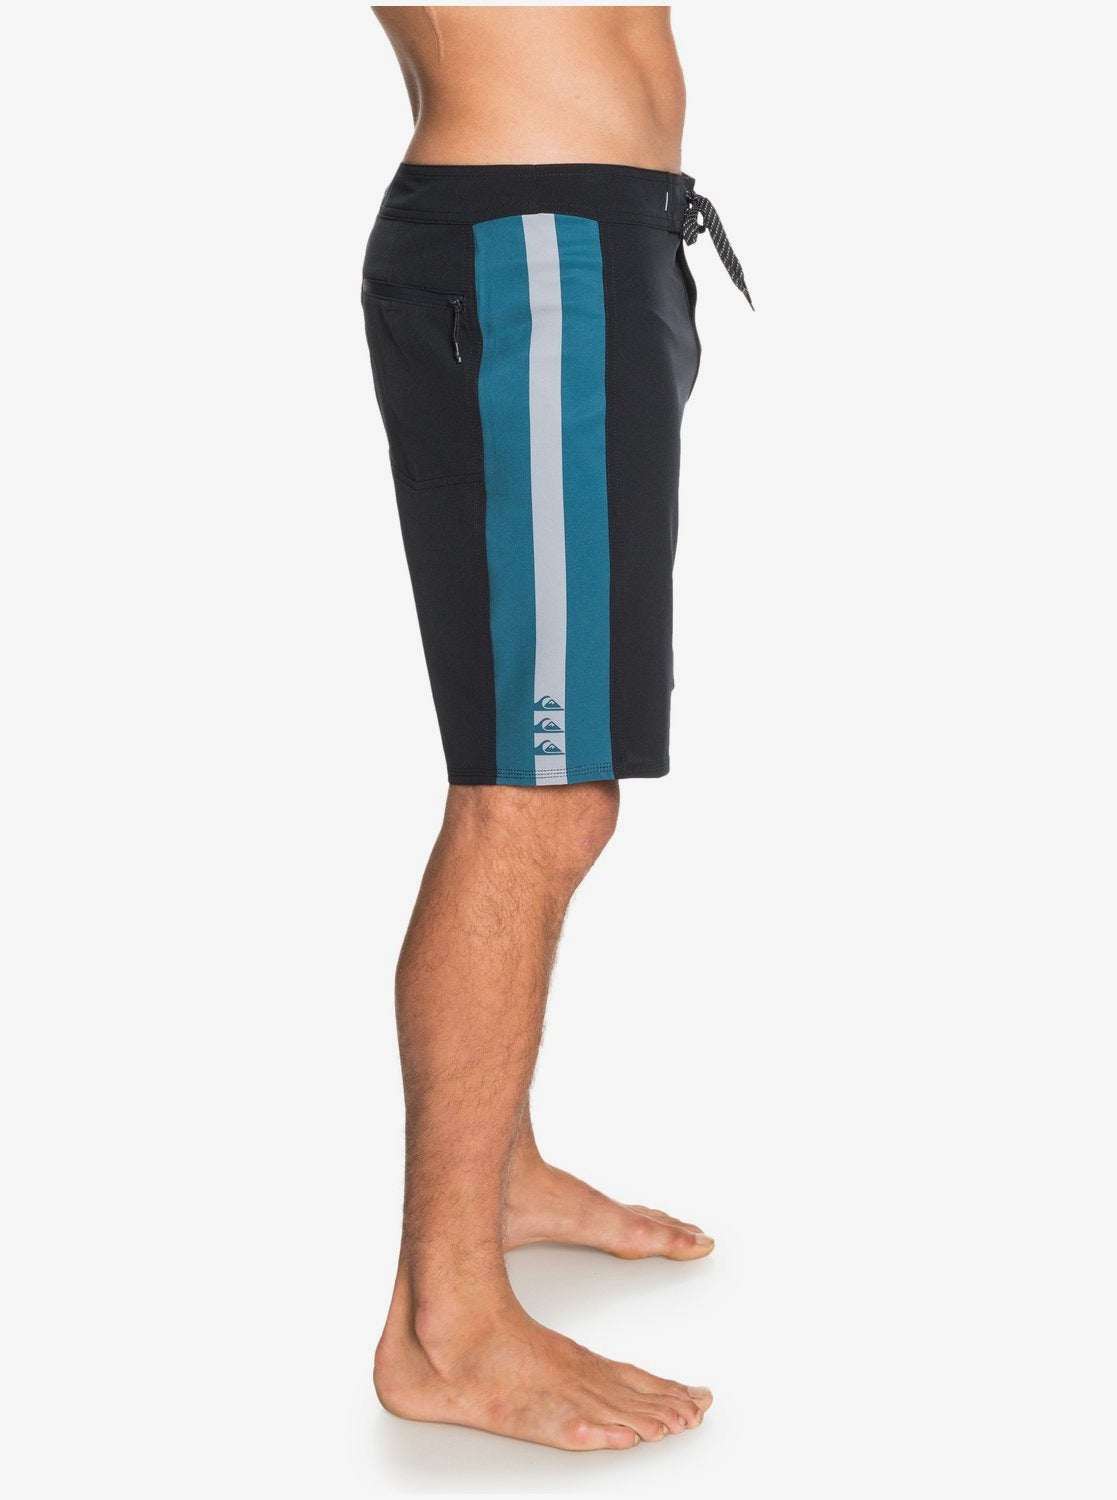 Quiksilver Highline Arch Shorts